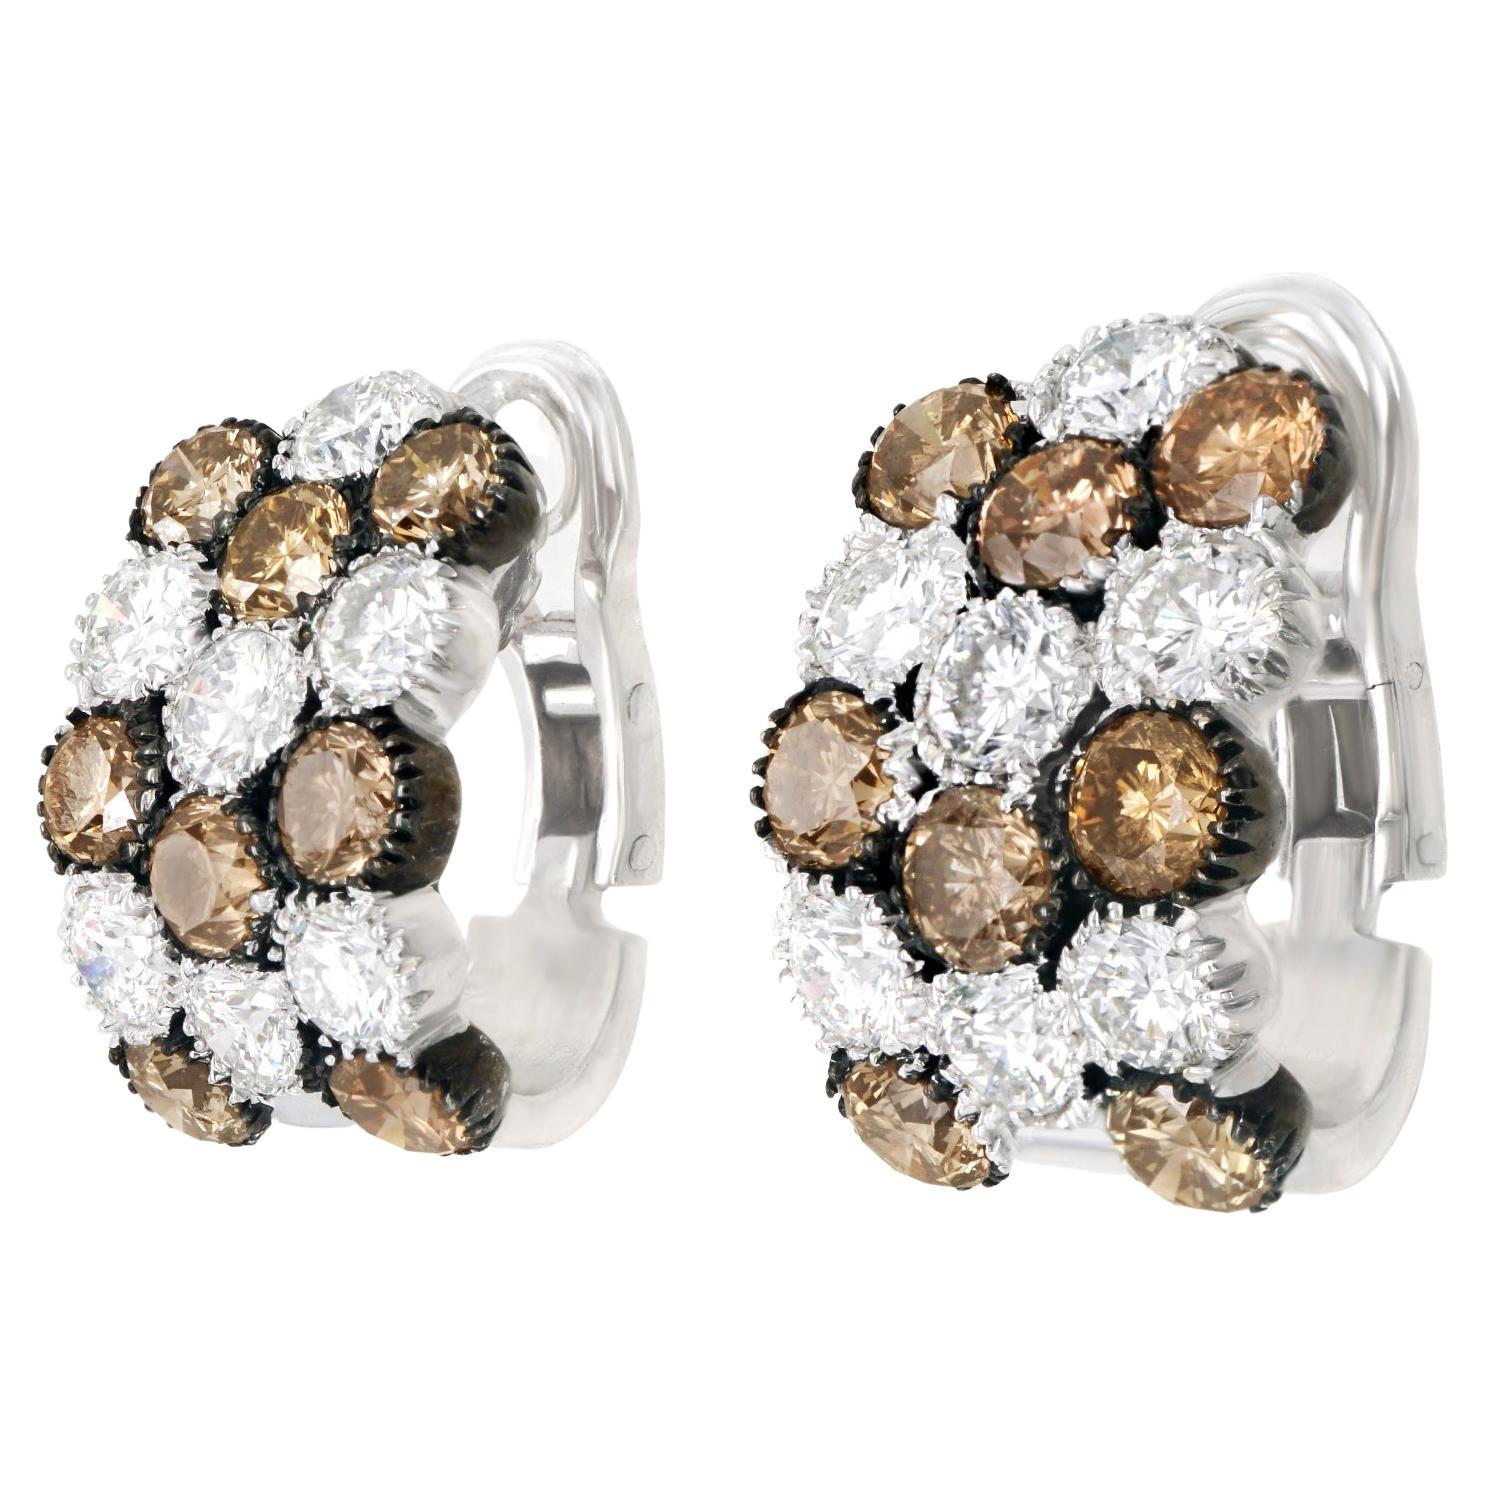 12.0 Carats of White and Cognac Diamond Gold Earrings